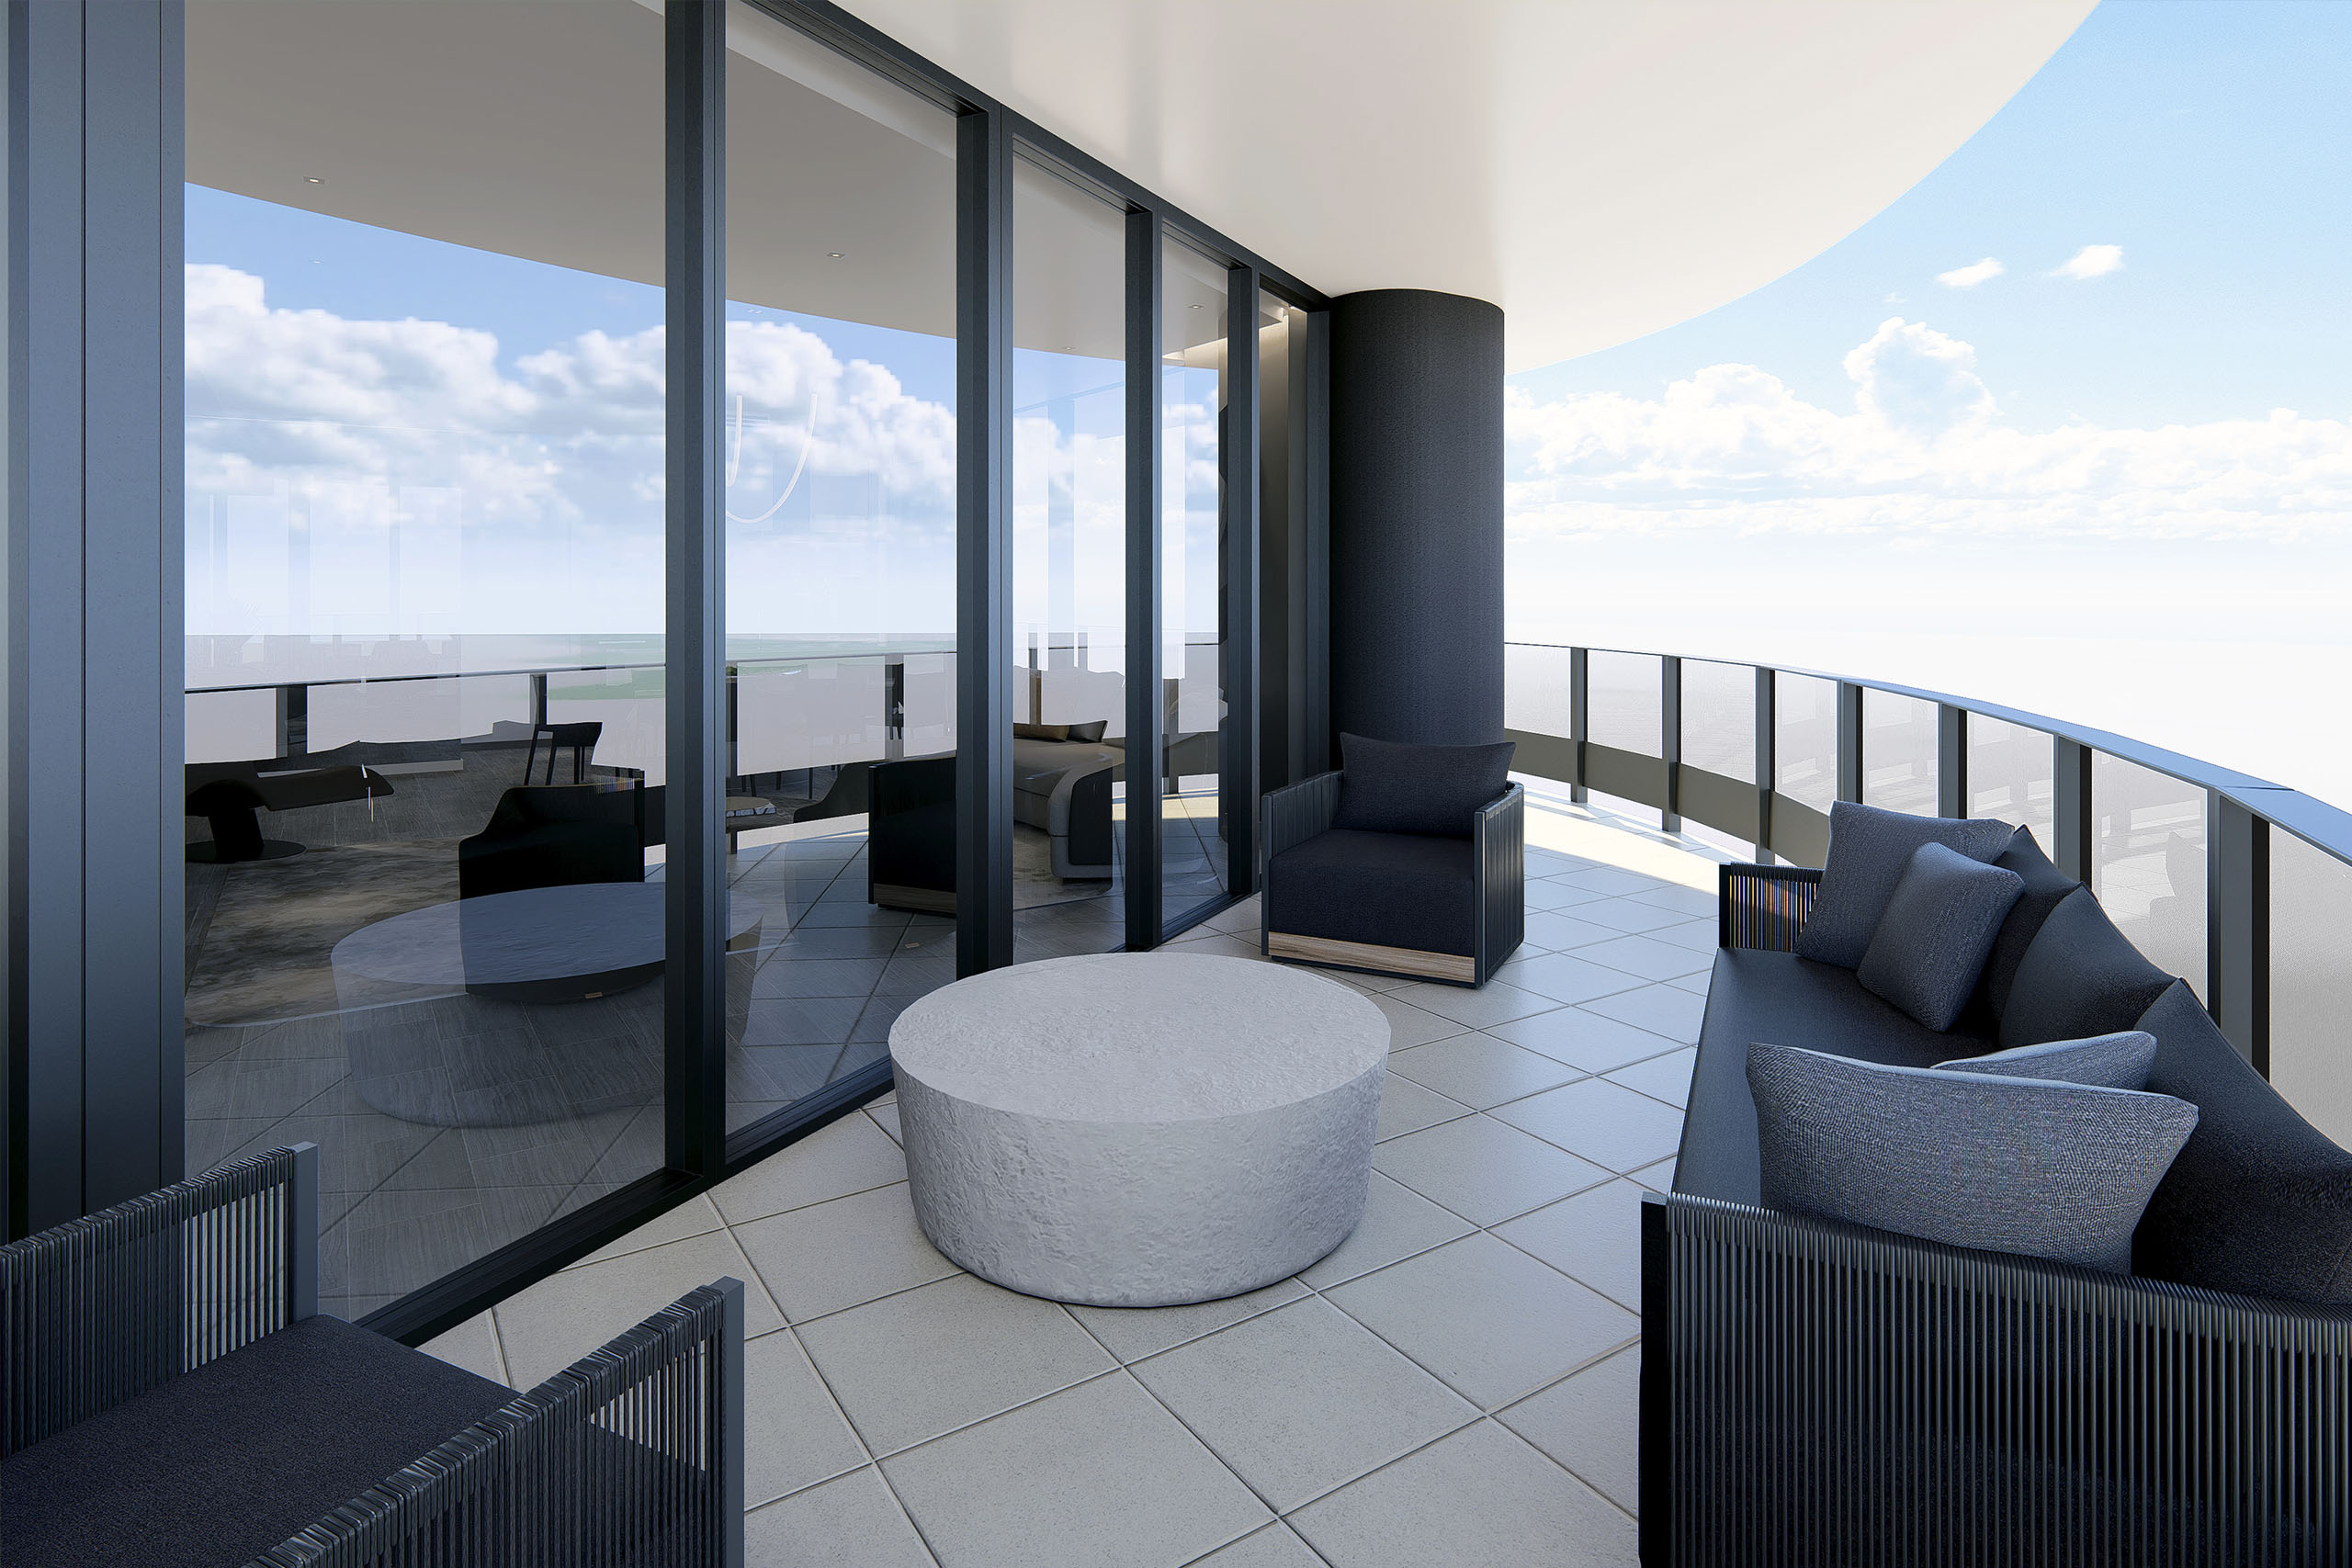 Contemporary balcony furniture with black sofa and black lounge chairs with ropes for outdoor